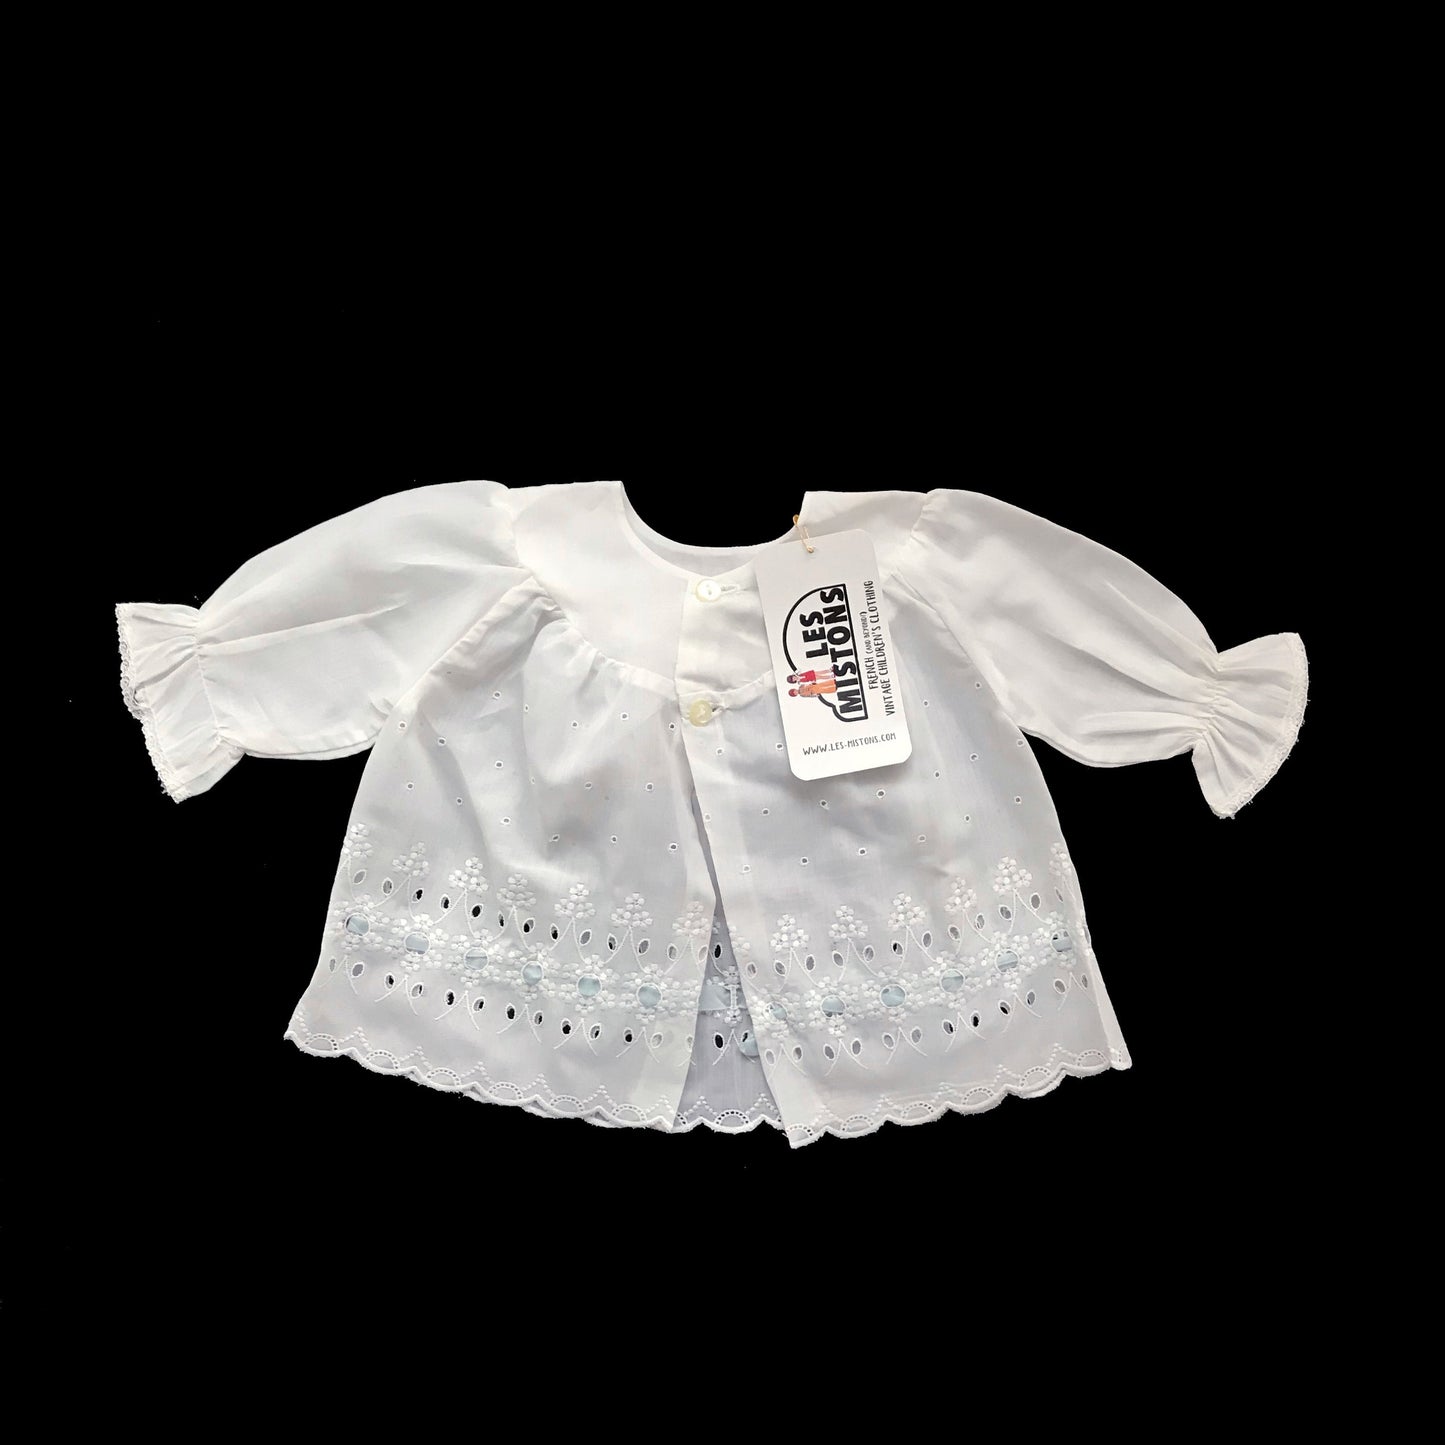 Vintage 60's "Broderie Anglaise" Blue Ribbon Embroidered White Shirt/ Top / Blouse Made in France 0-3 Months